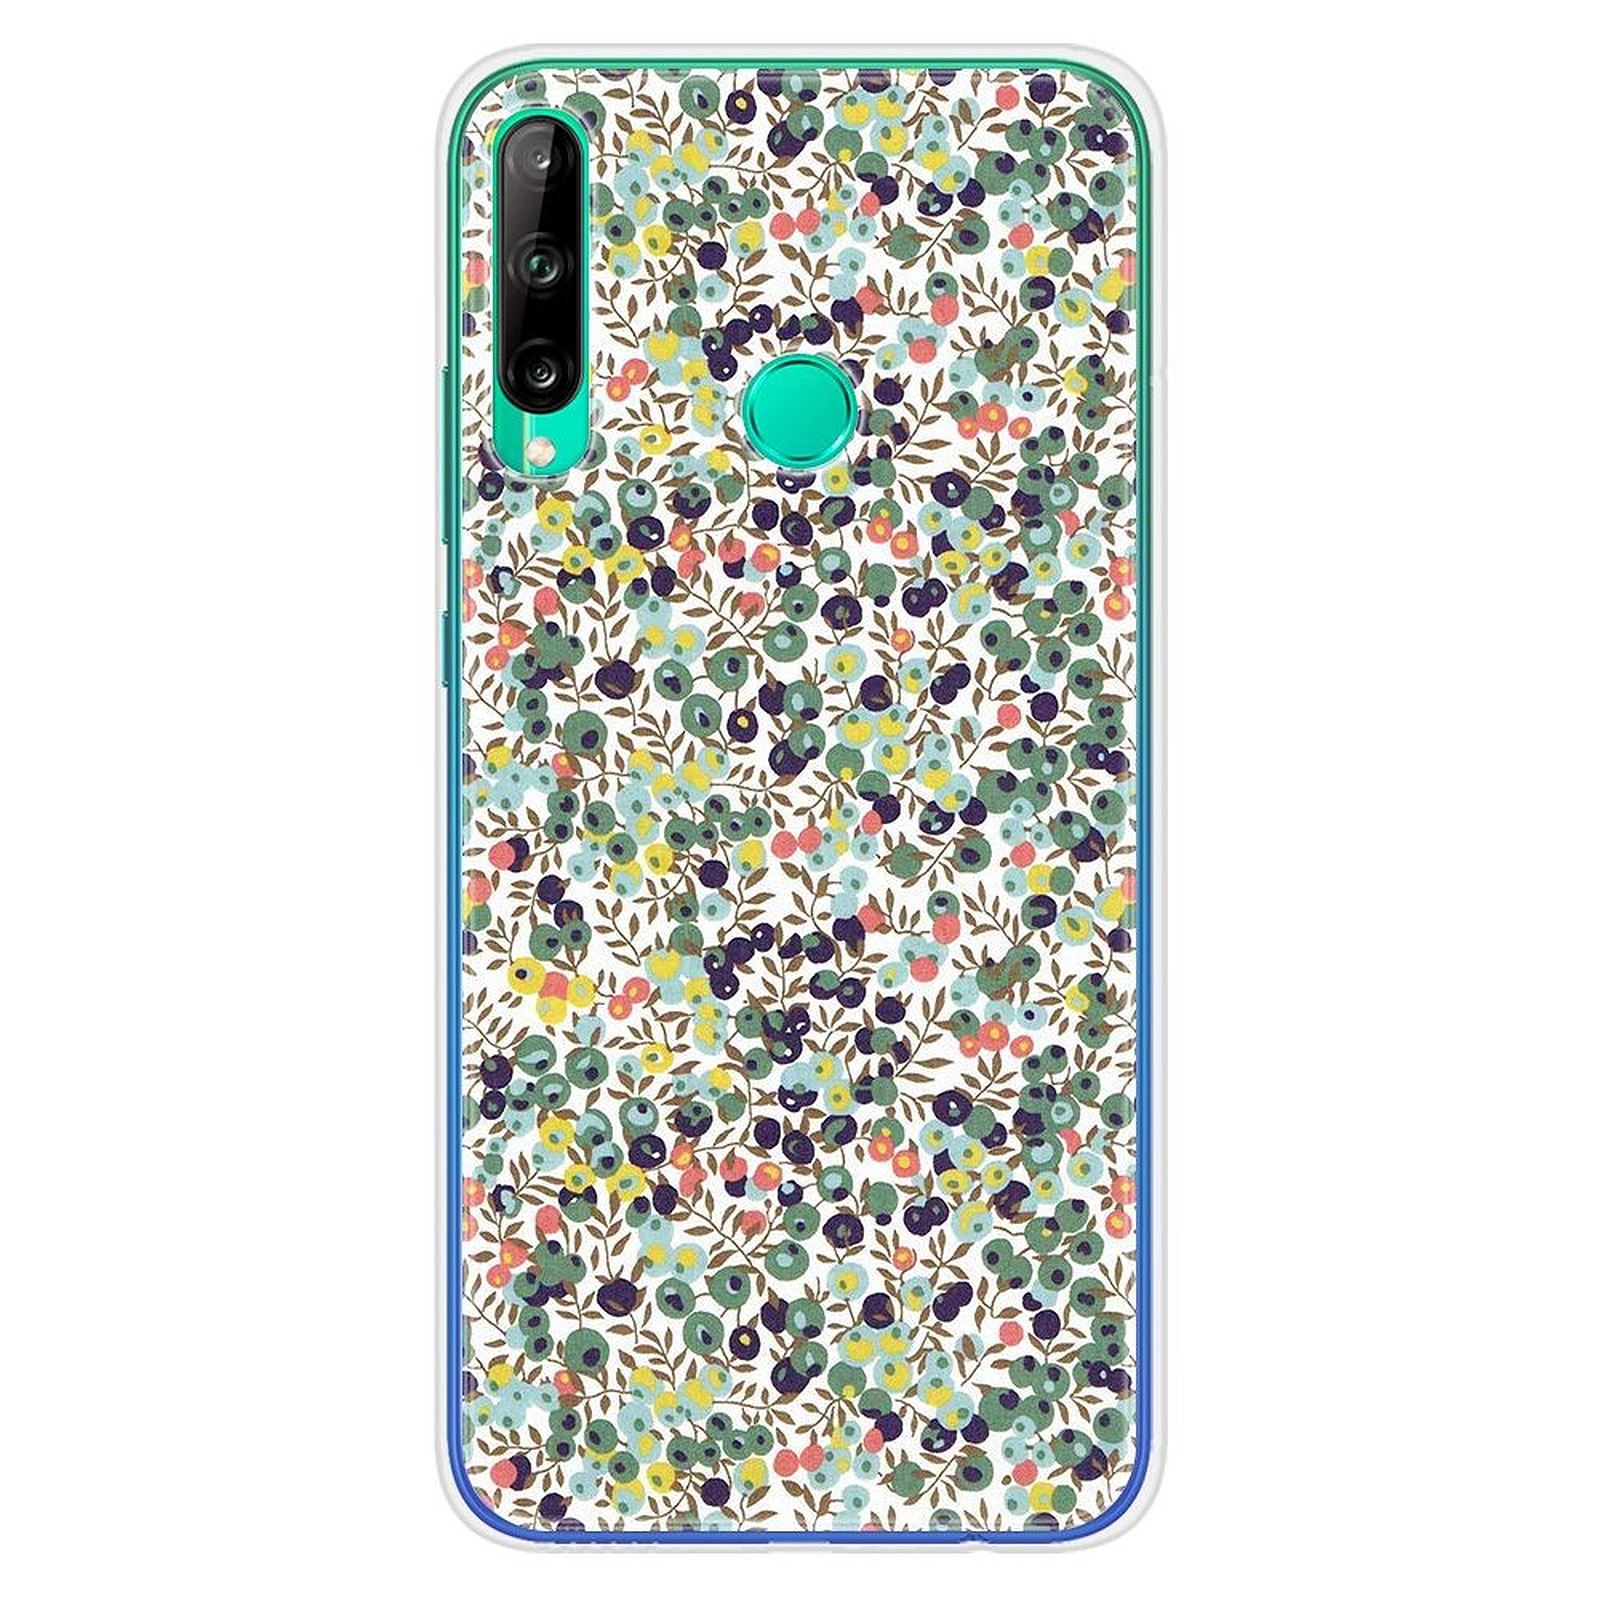 1001 Coques Coque silicone gel Huawei P40 Lite E motif Liberty Wiltshire Vert - Coque telephone 1001Coques